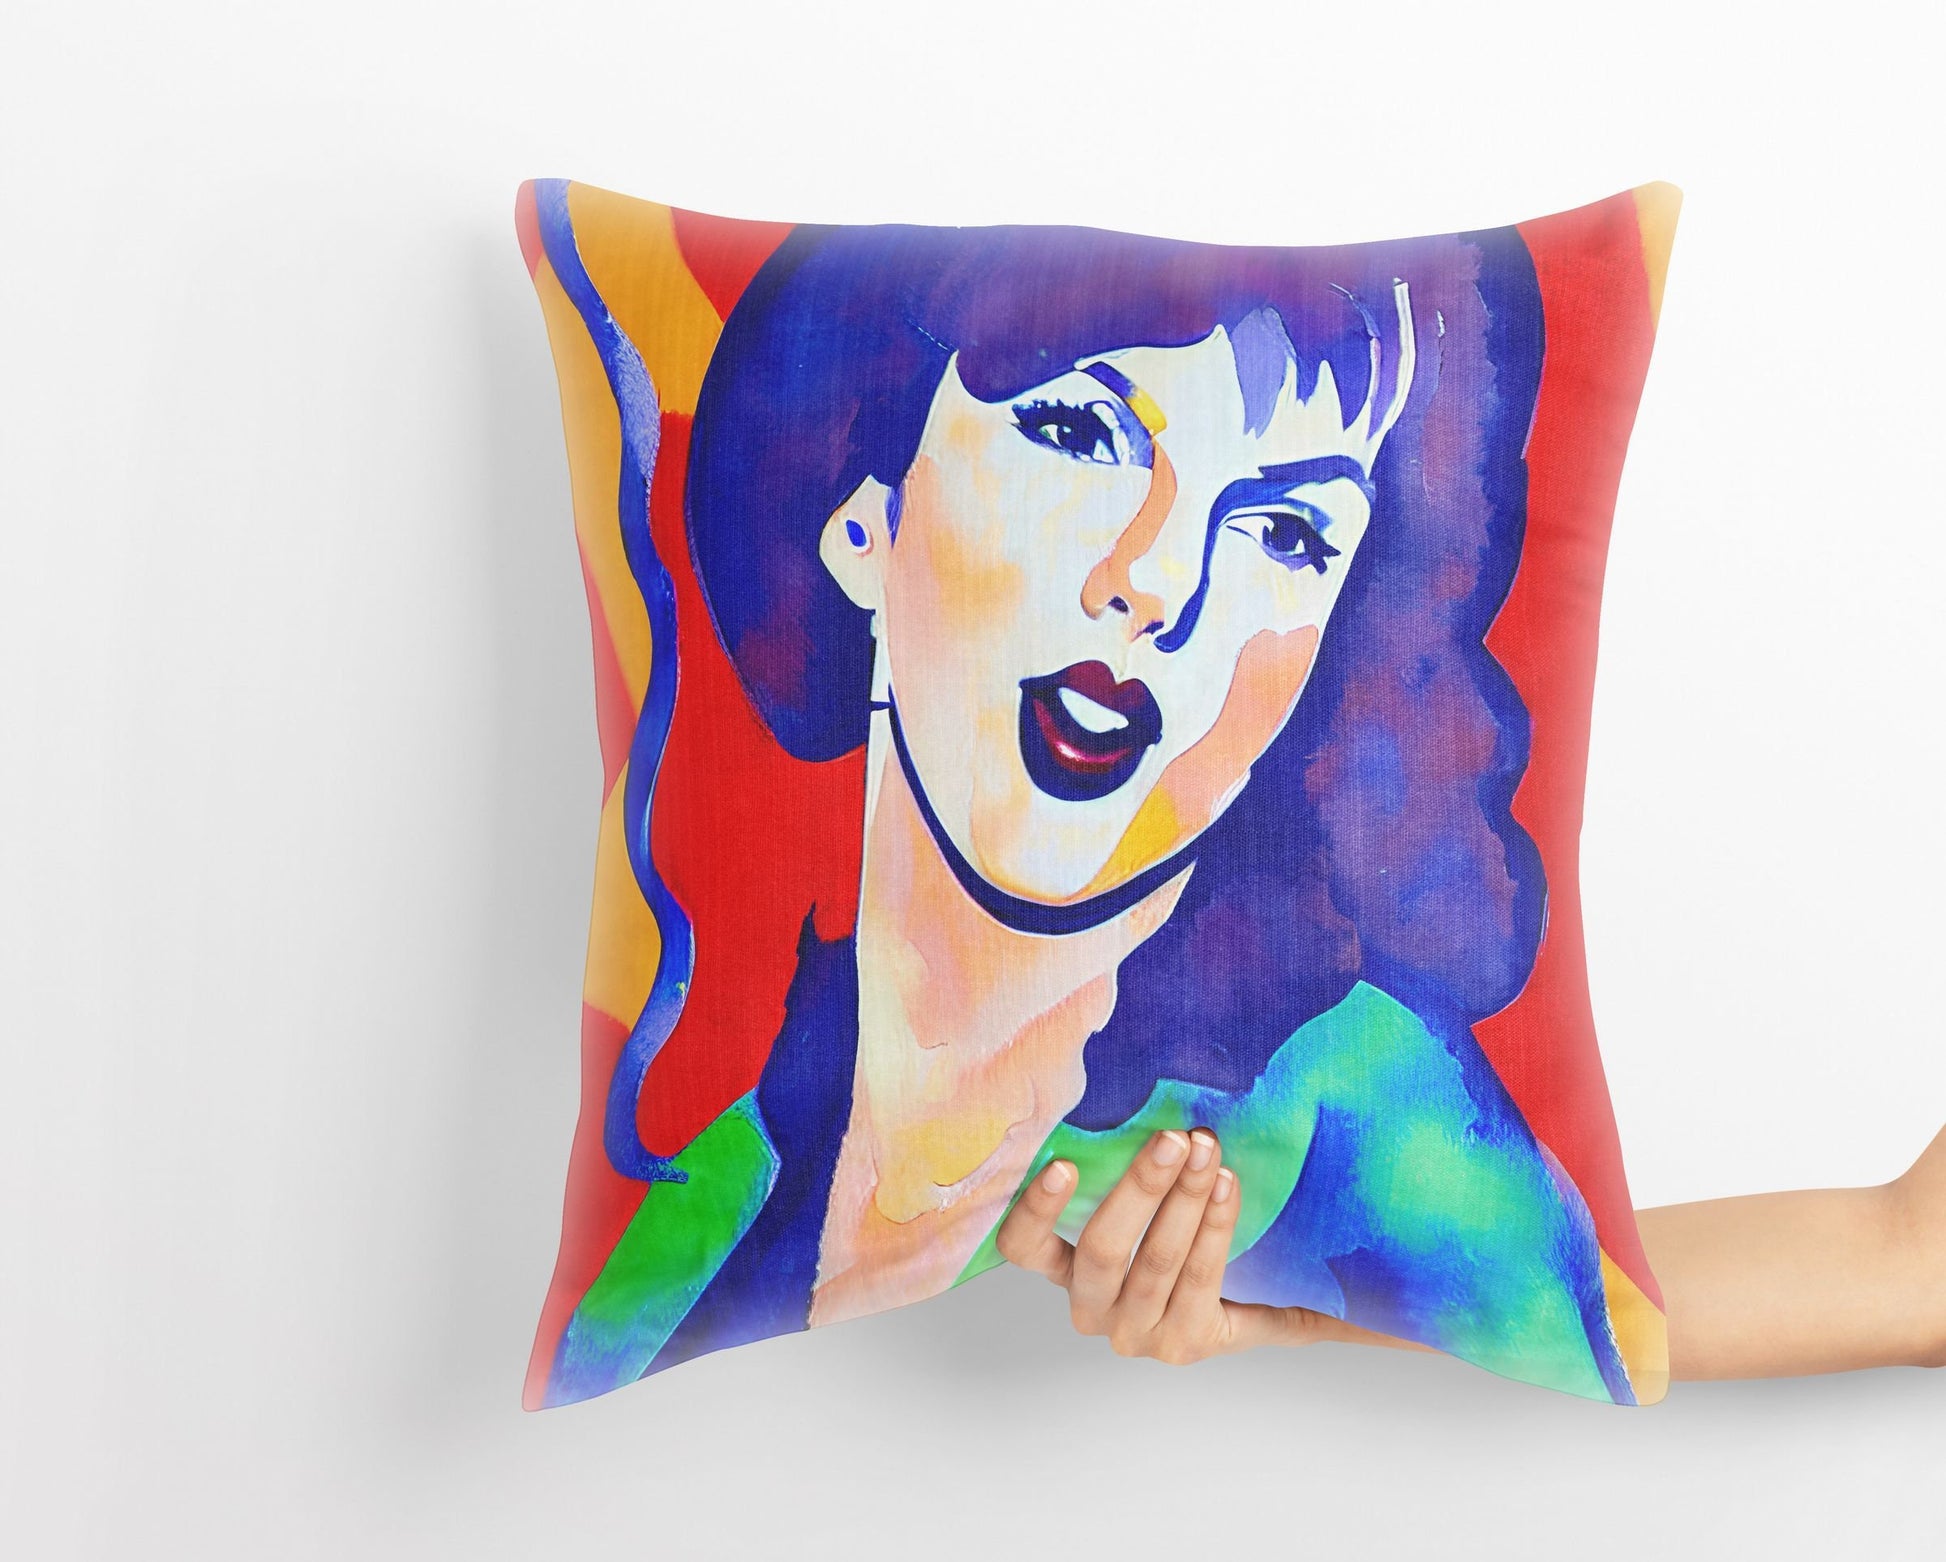 Taylor Swift Throw Pillow Cover, Abstract Pillow, Soft Pillow Cases, Colorful Pillow Case, Fashion, Housewarming Gift, Abstract Decor